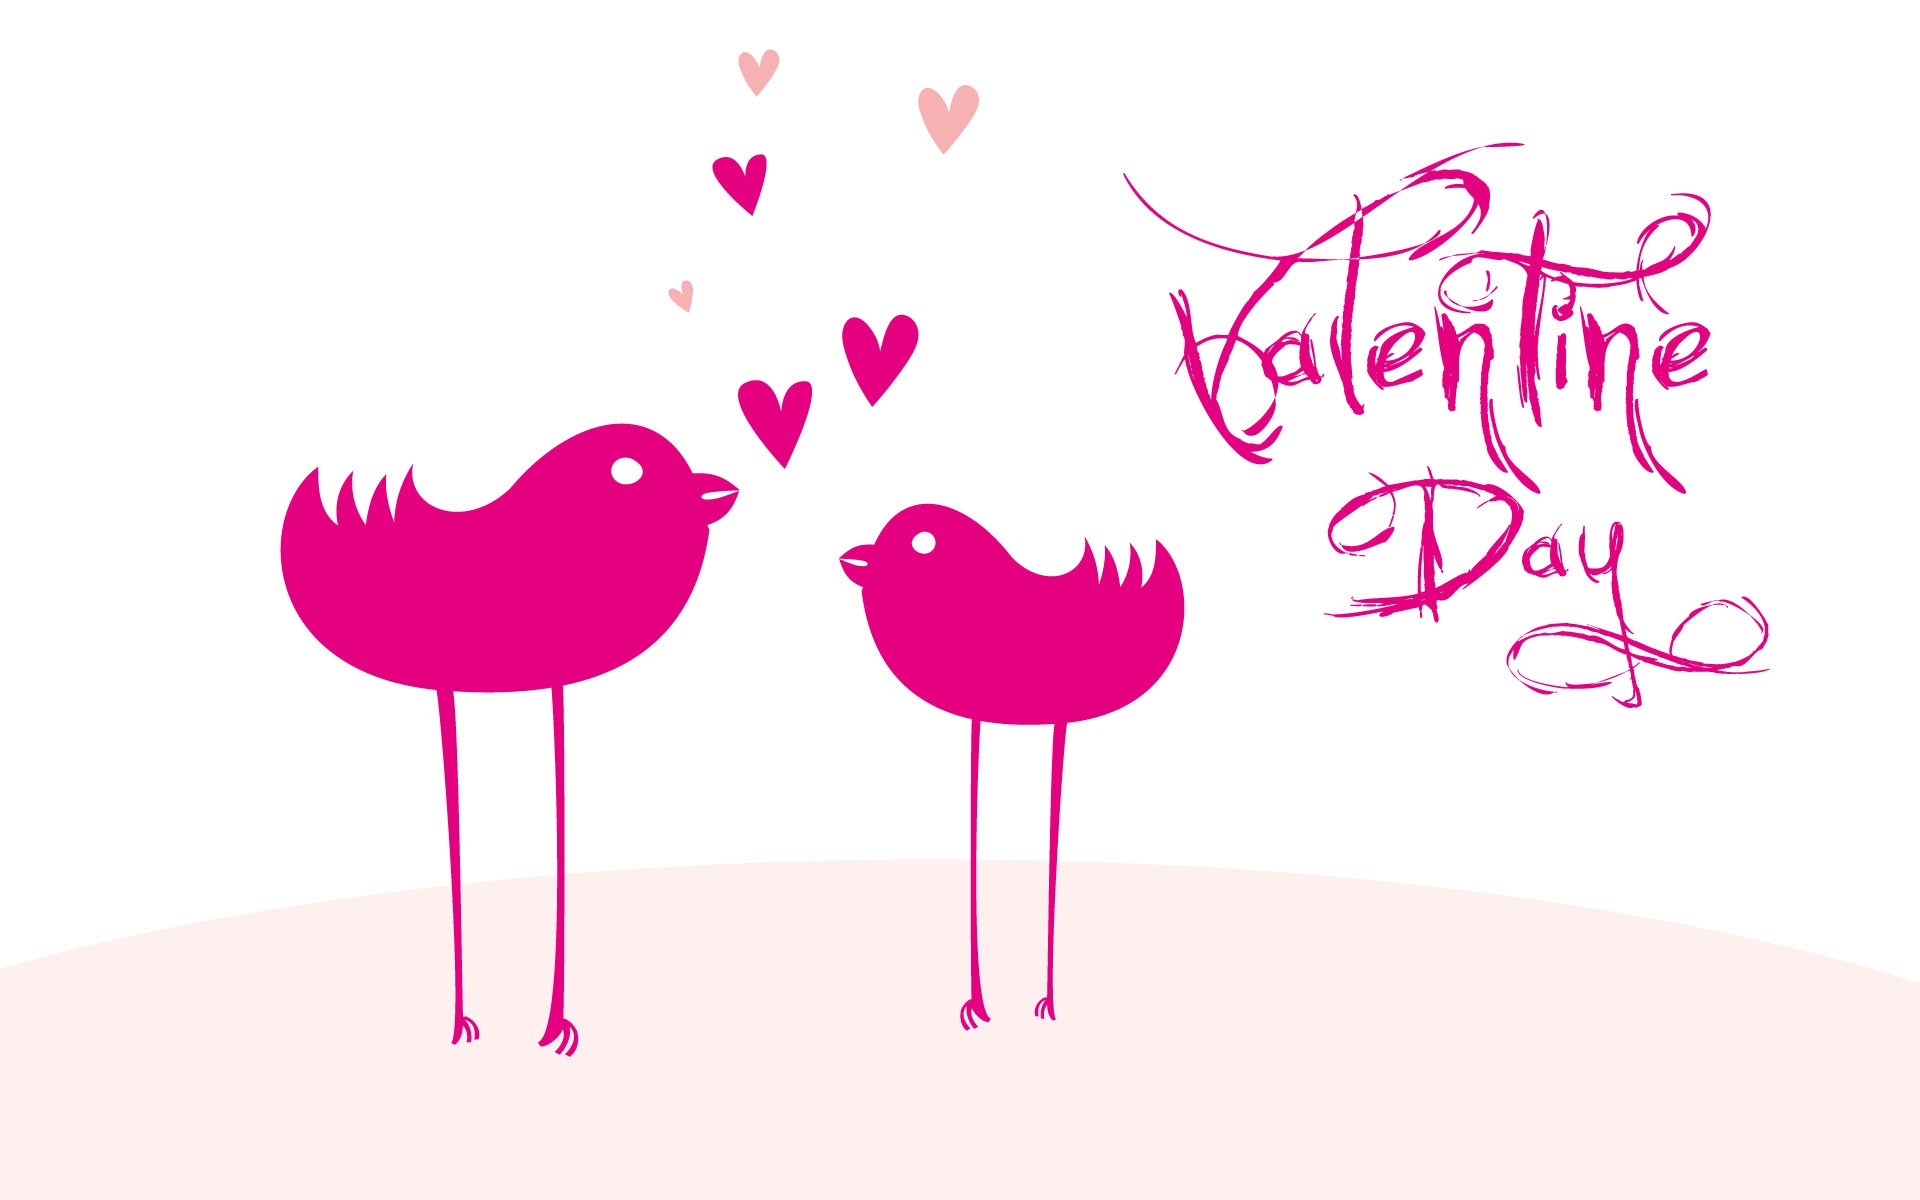 Valentine's Day Love Theme Wallpapers #37 - 1920x1200